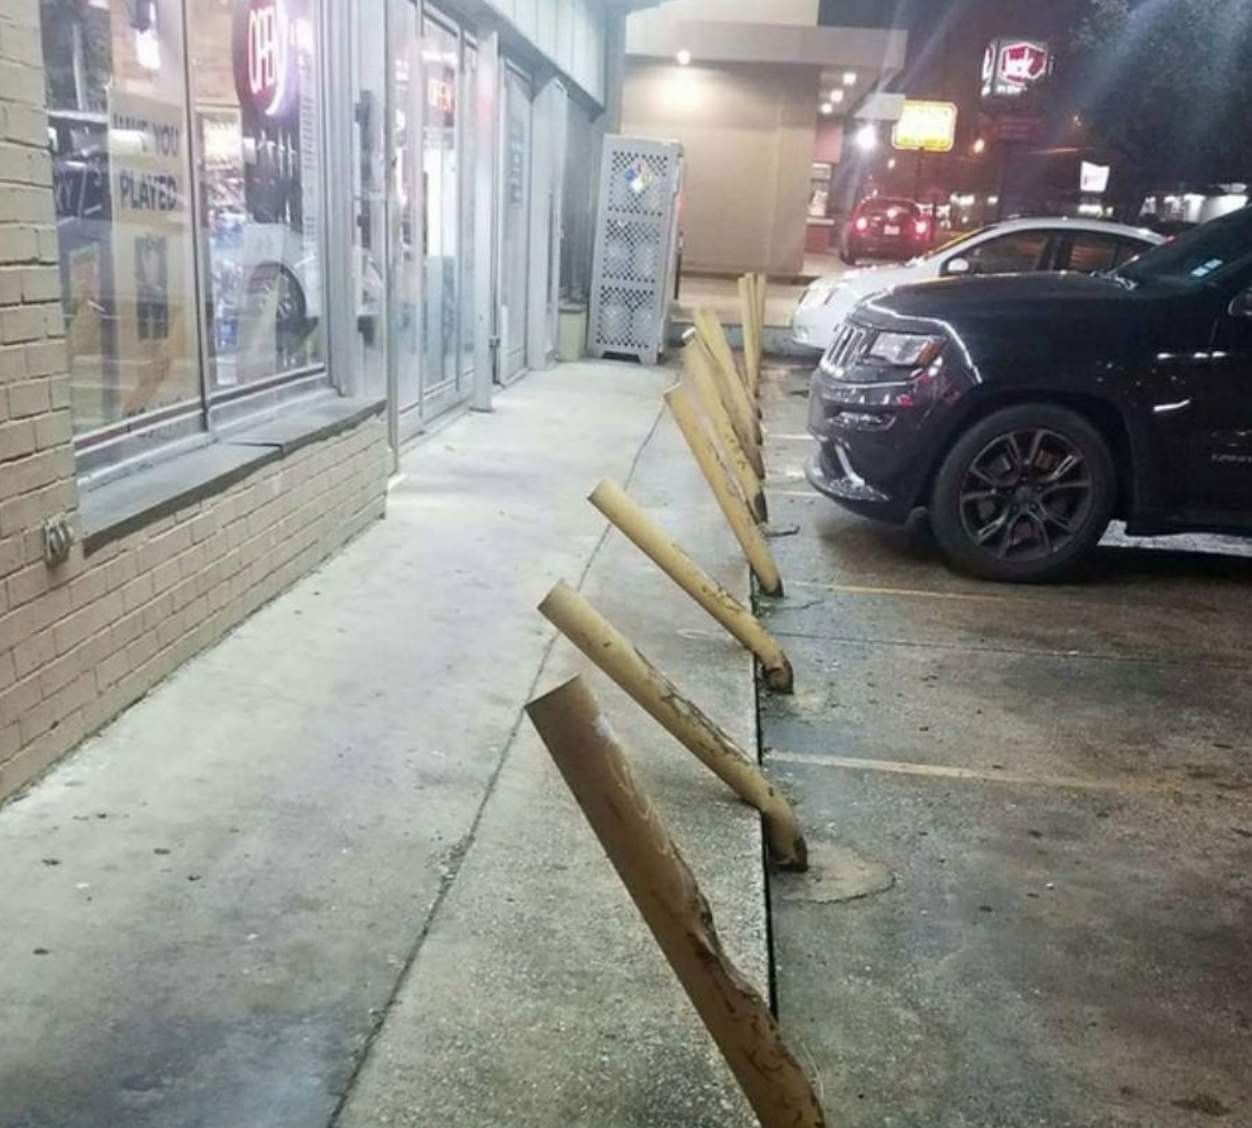 Parking in front a liquor store...